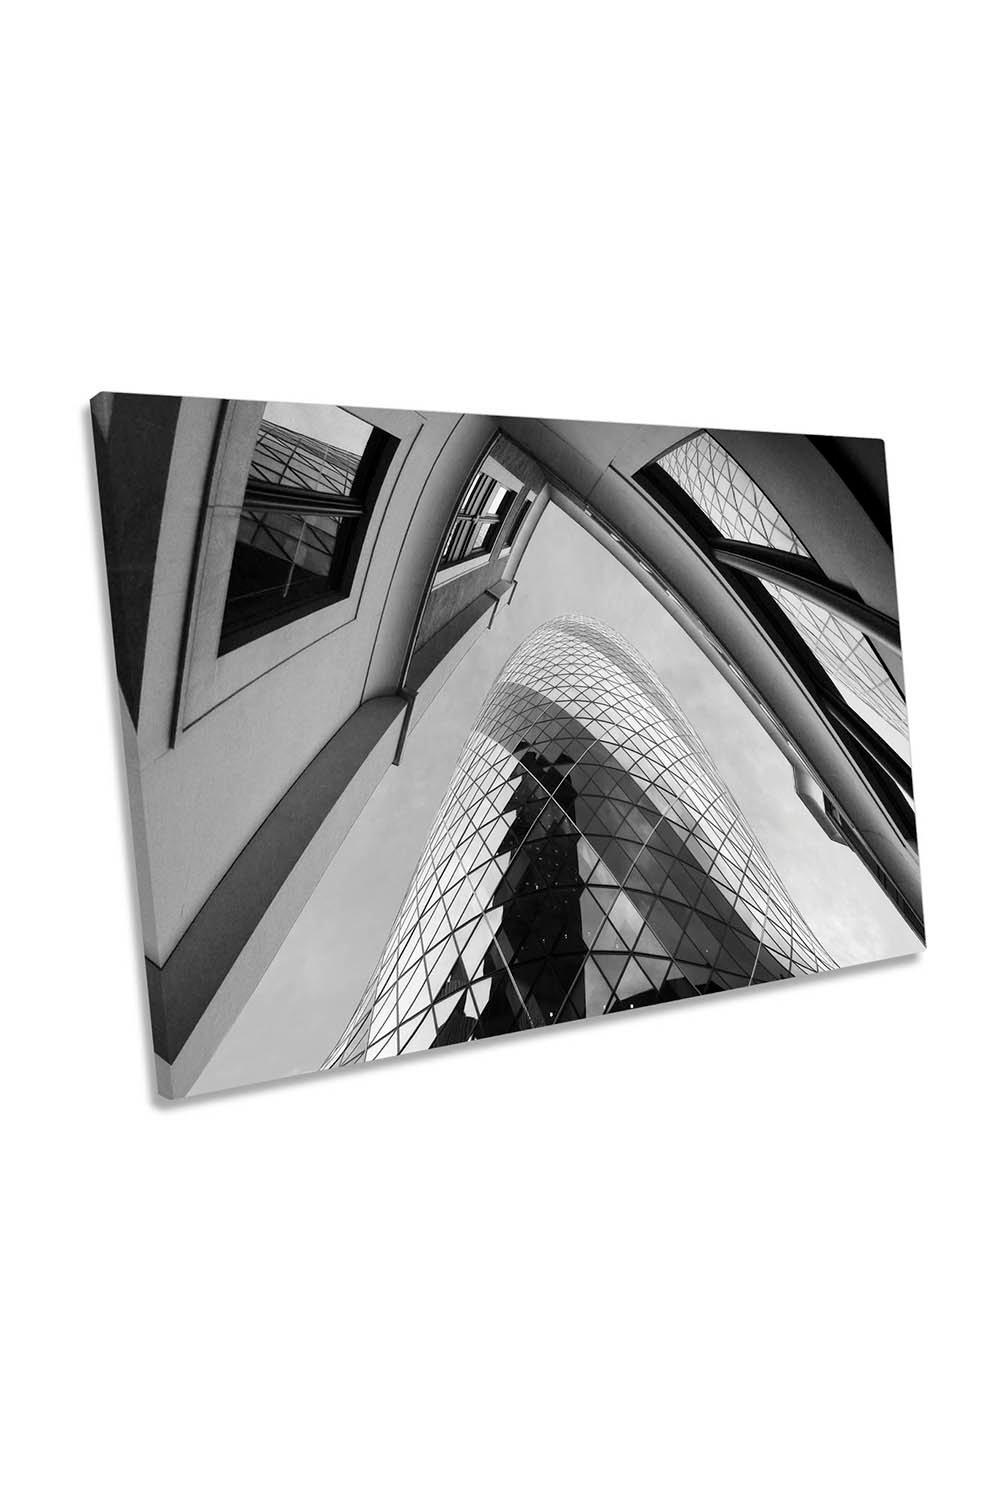 Gherkin London Architecture Canvas Wall Art Picture Print